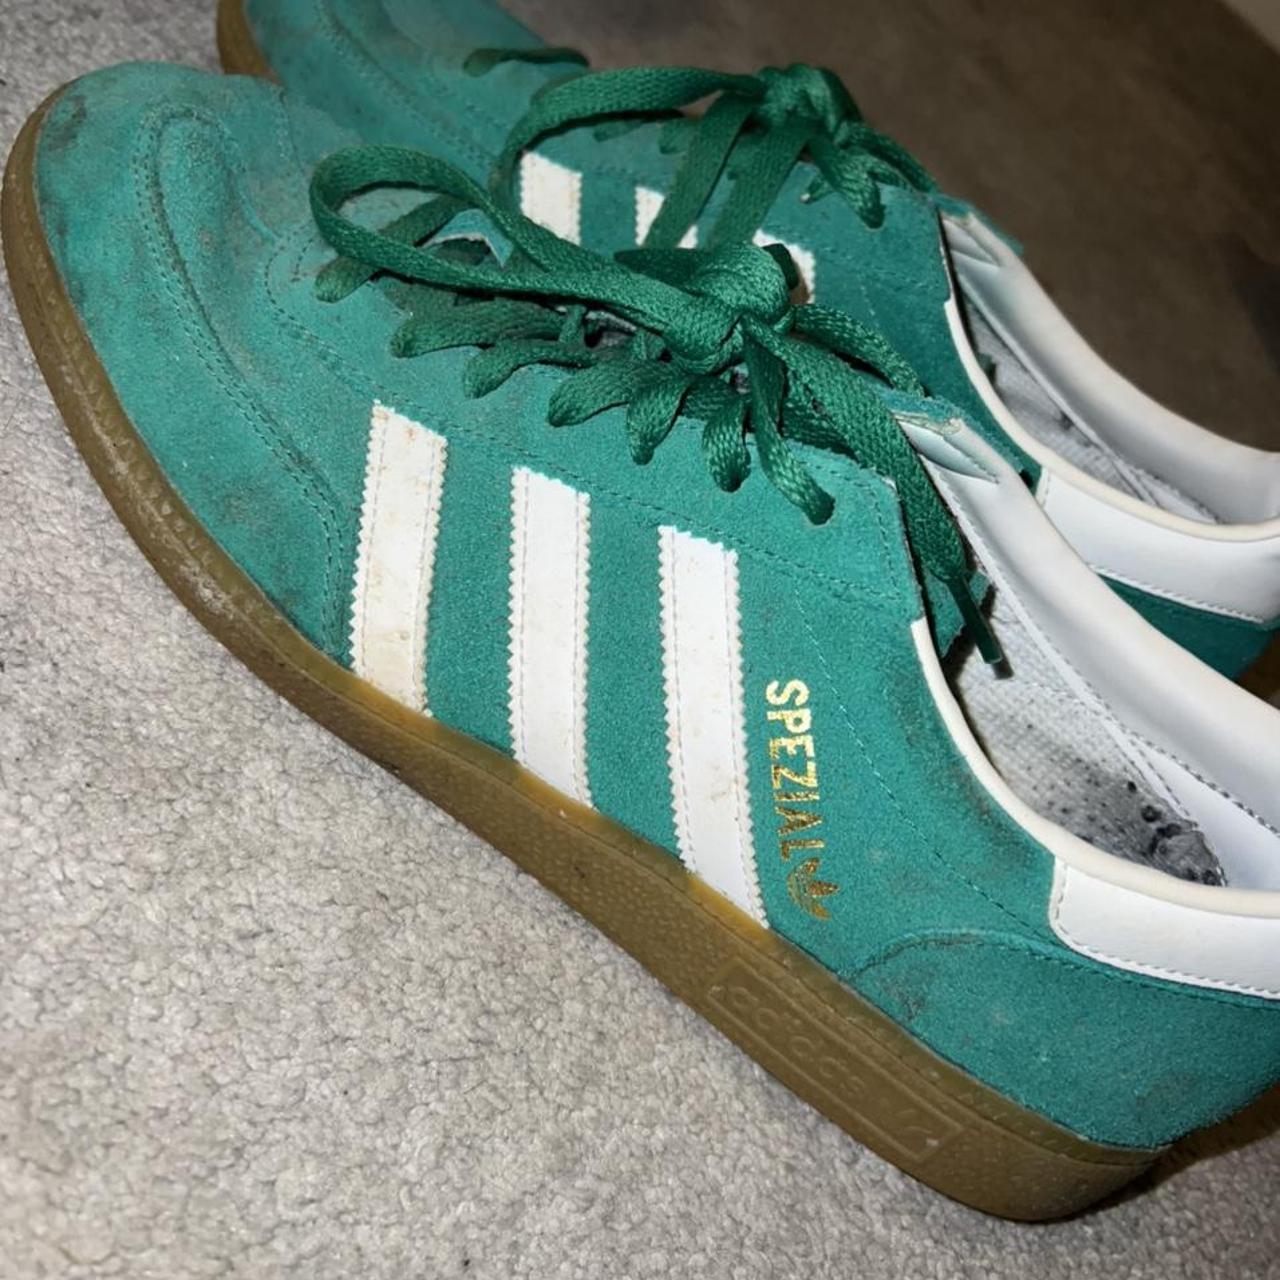 Green and white Spezials slight markings in the... - Depop